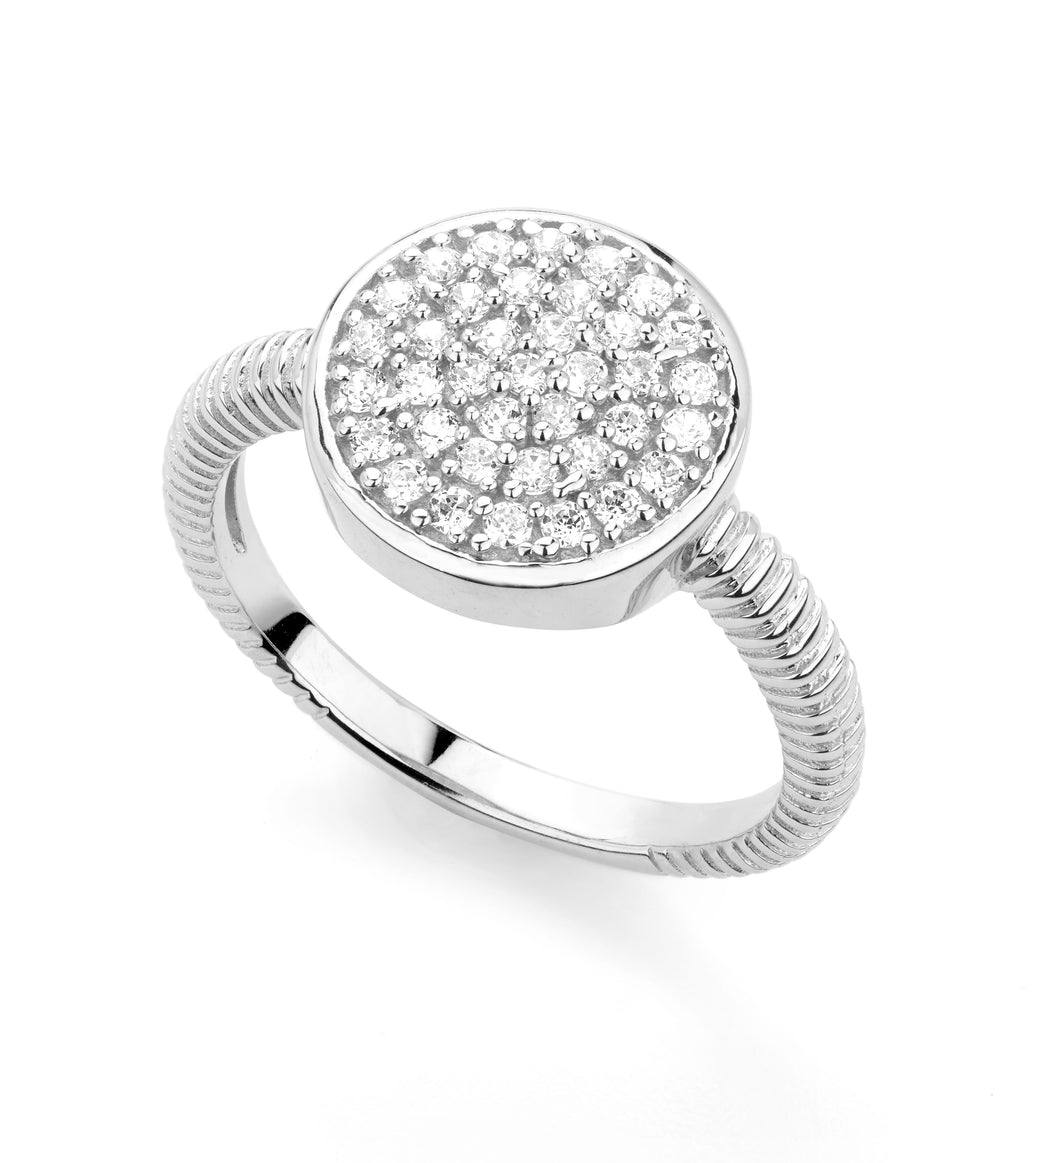 MISS MIMI  925 Sterling Silver Circle Ring  02-021346